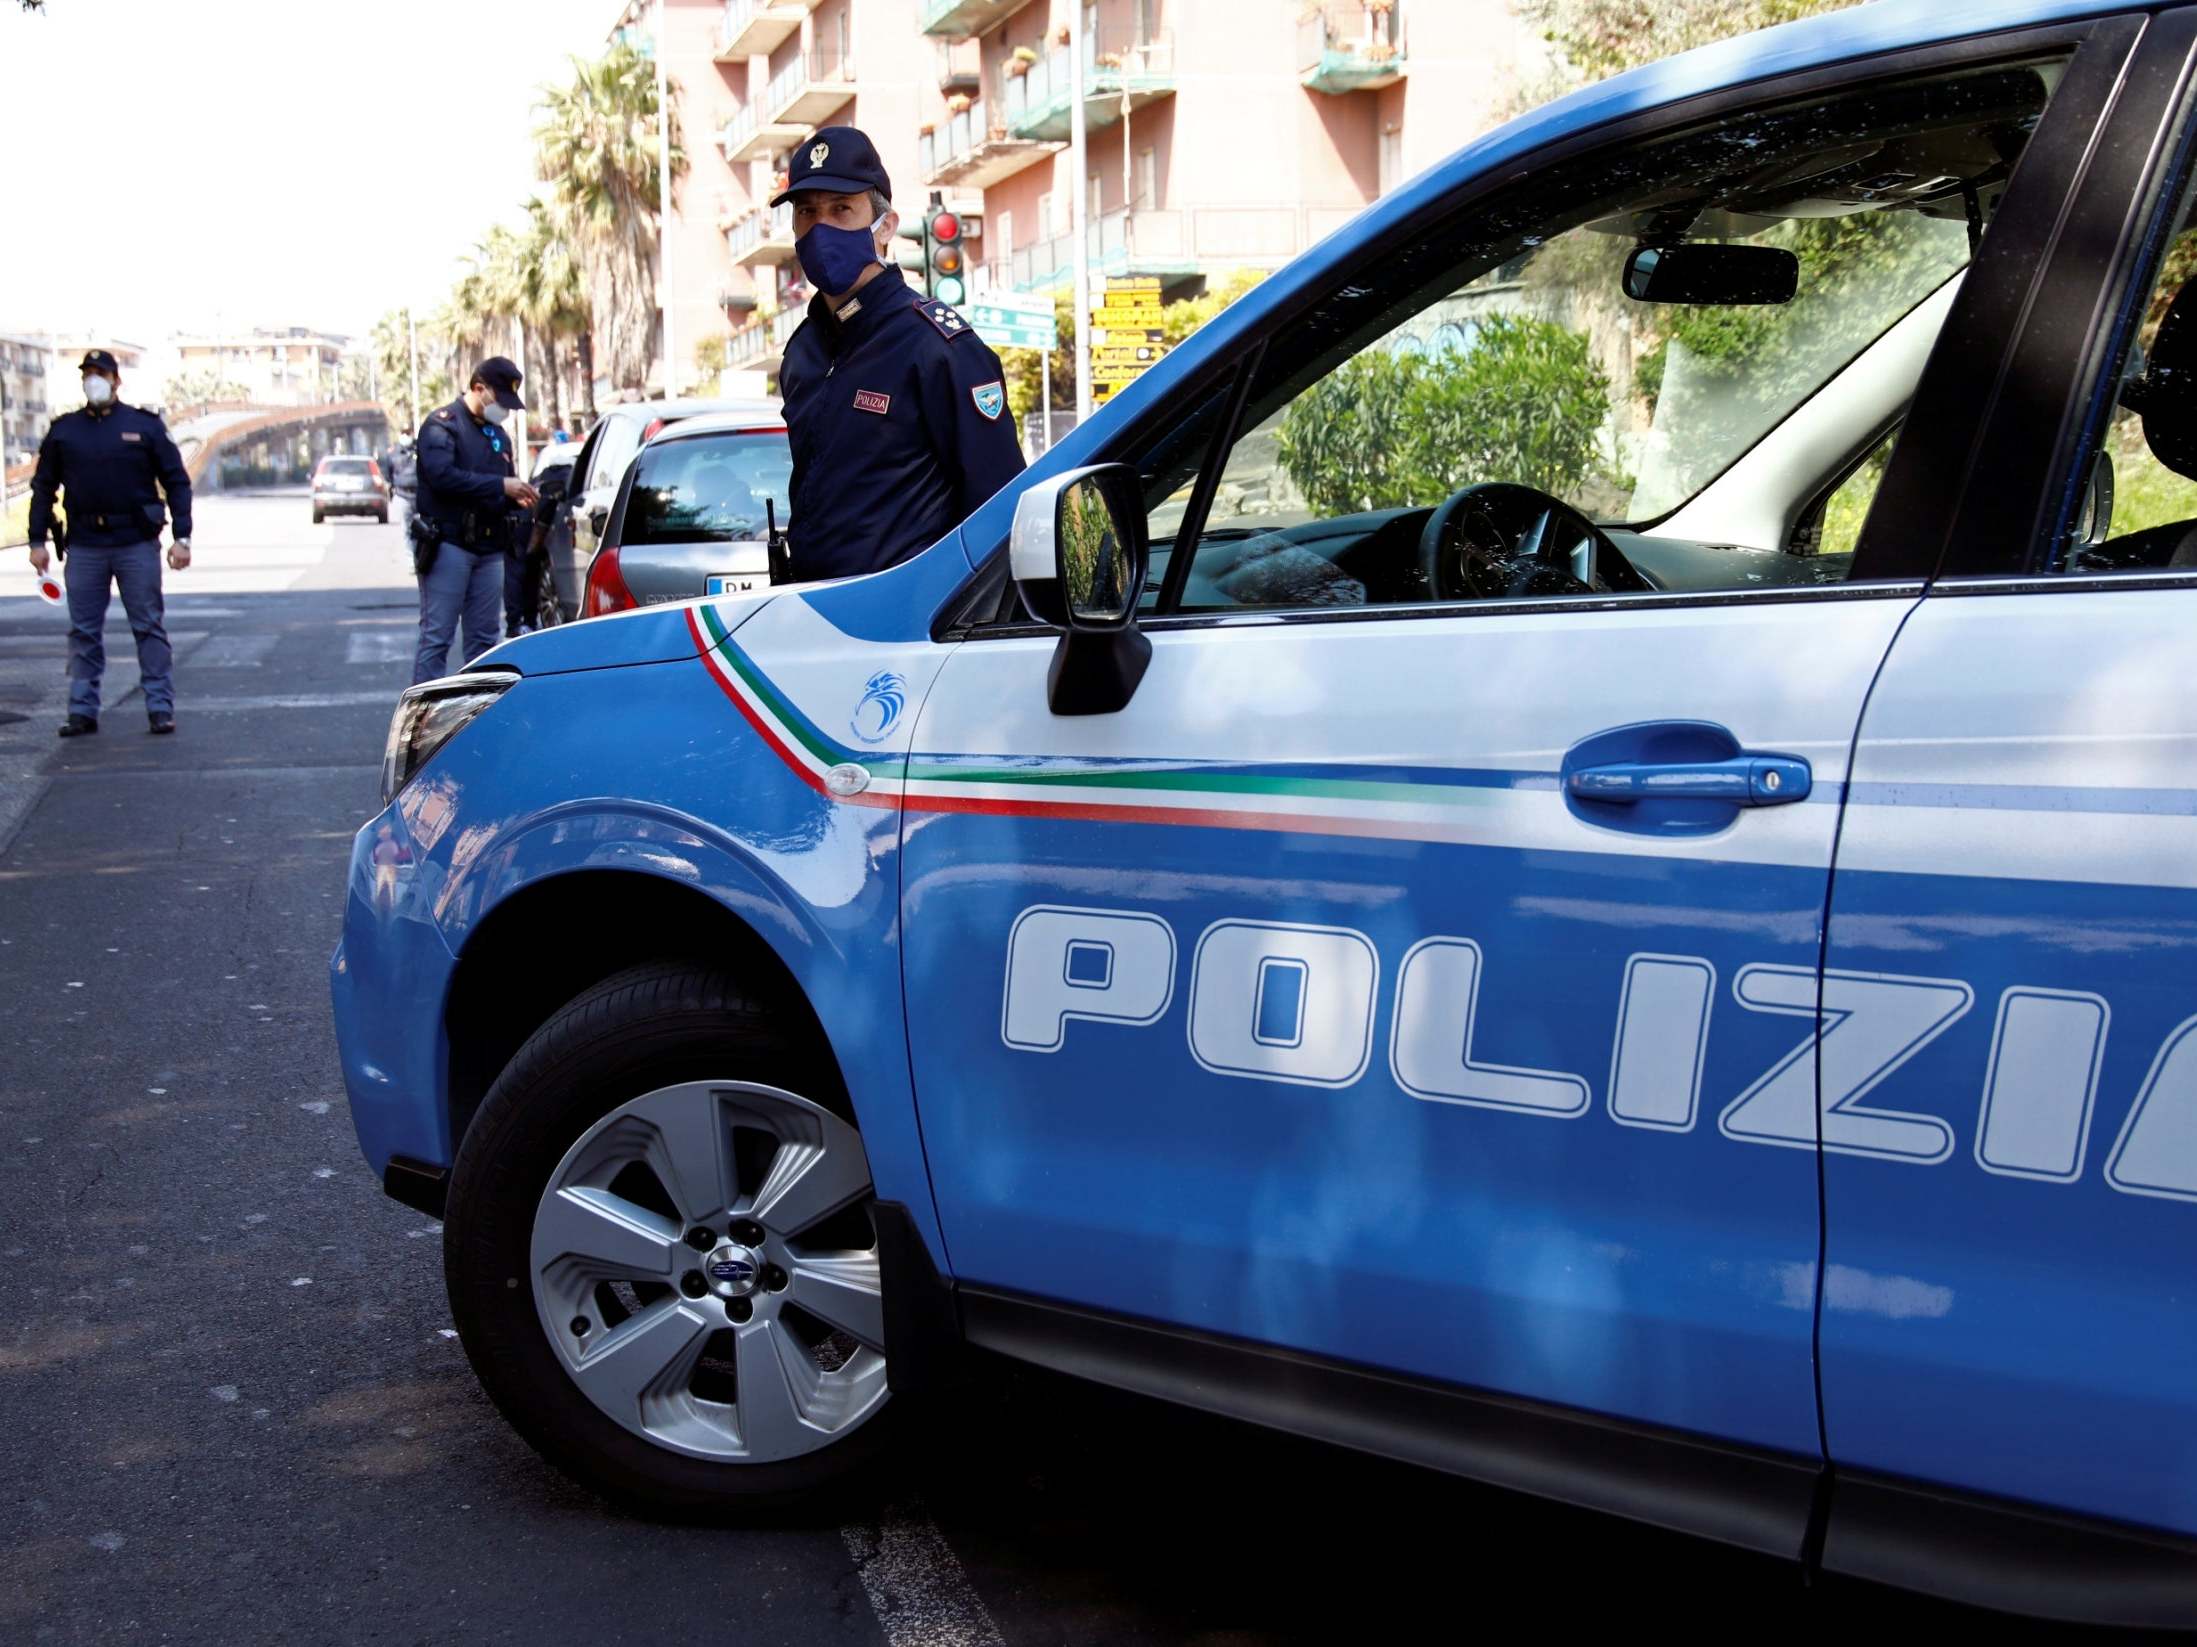 Police in Italy have reportedly charged a pharmacist who was caught at work despite a positive coronavirus test